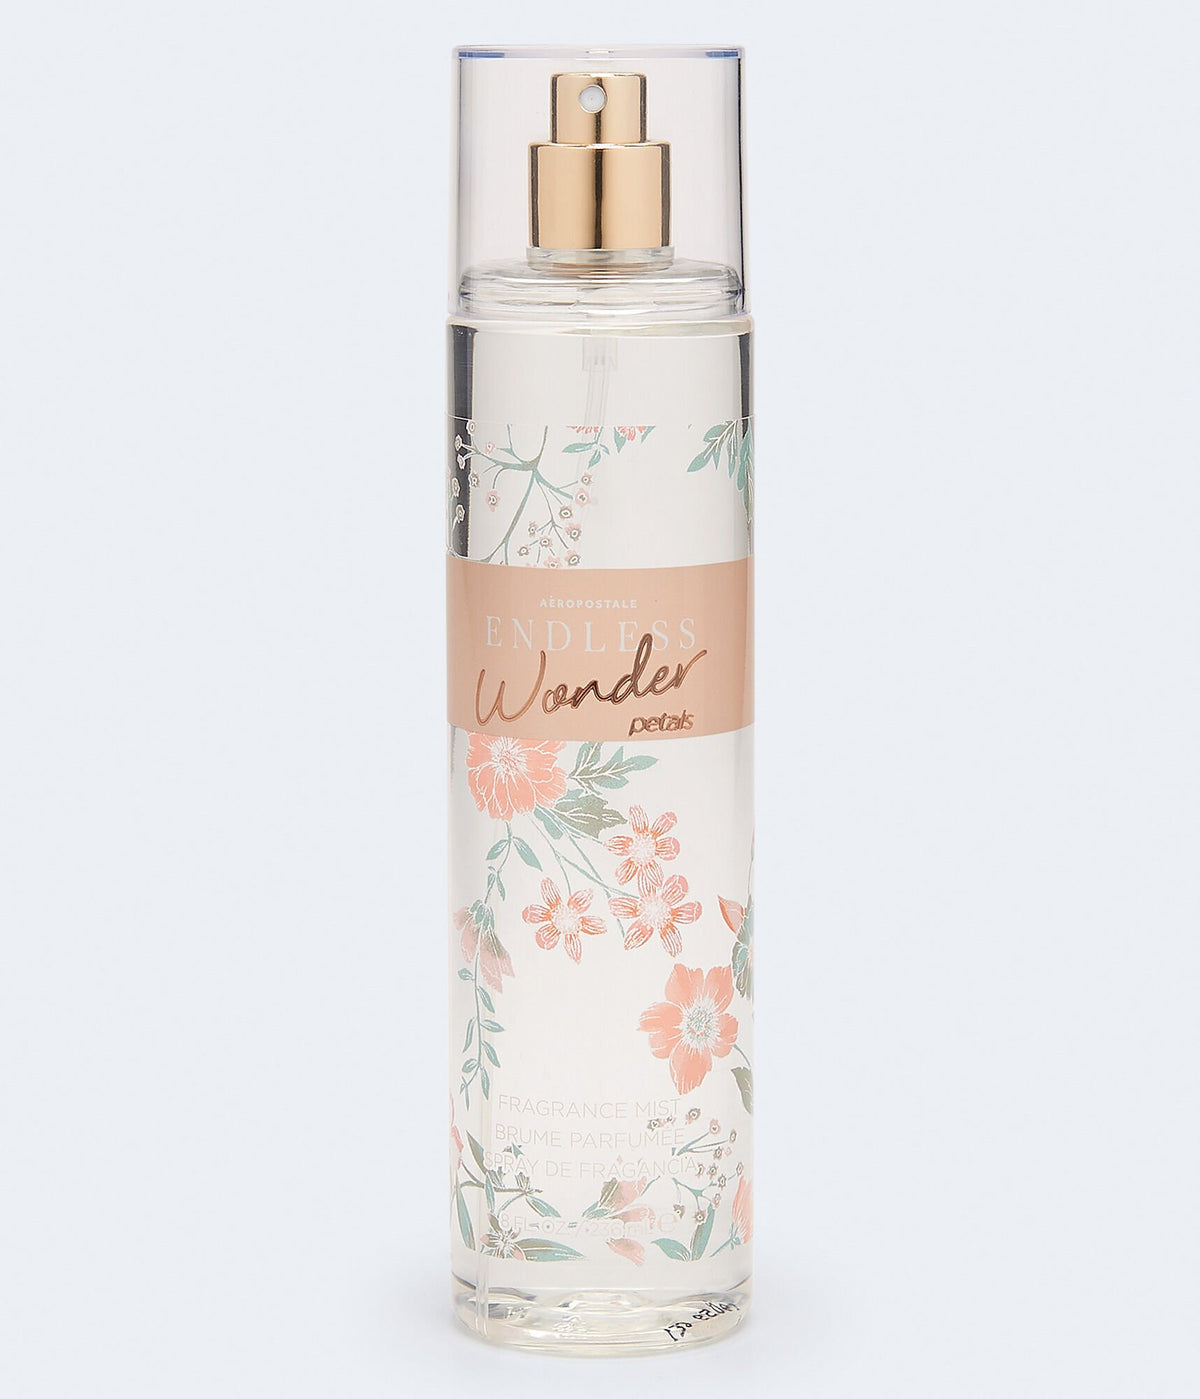 Aeropostale Womens' Endless Wonder Petals Fragrance Mist - Multi-colored - Size One Size - Glass - Teen Fashion & Clothing Novelty